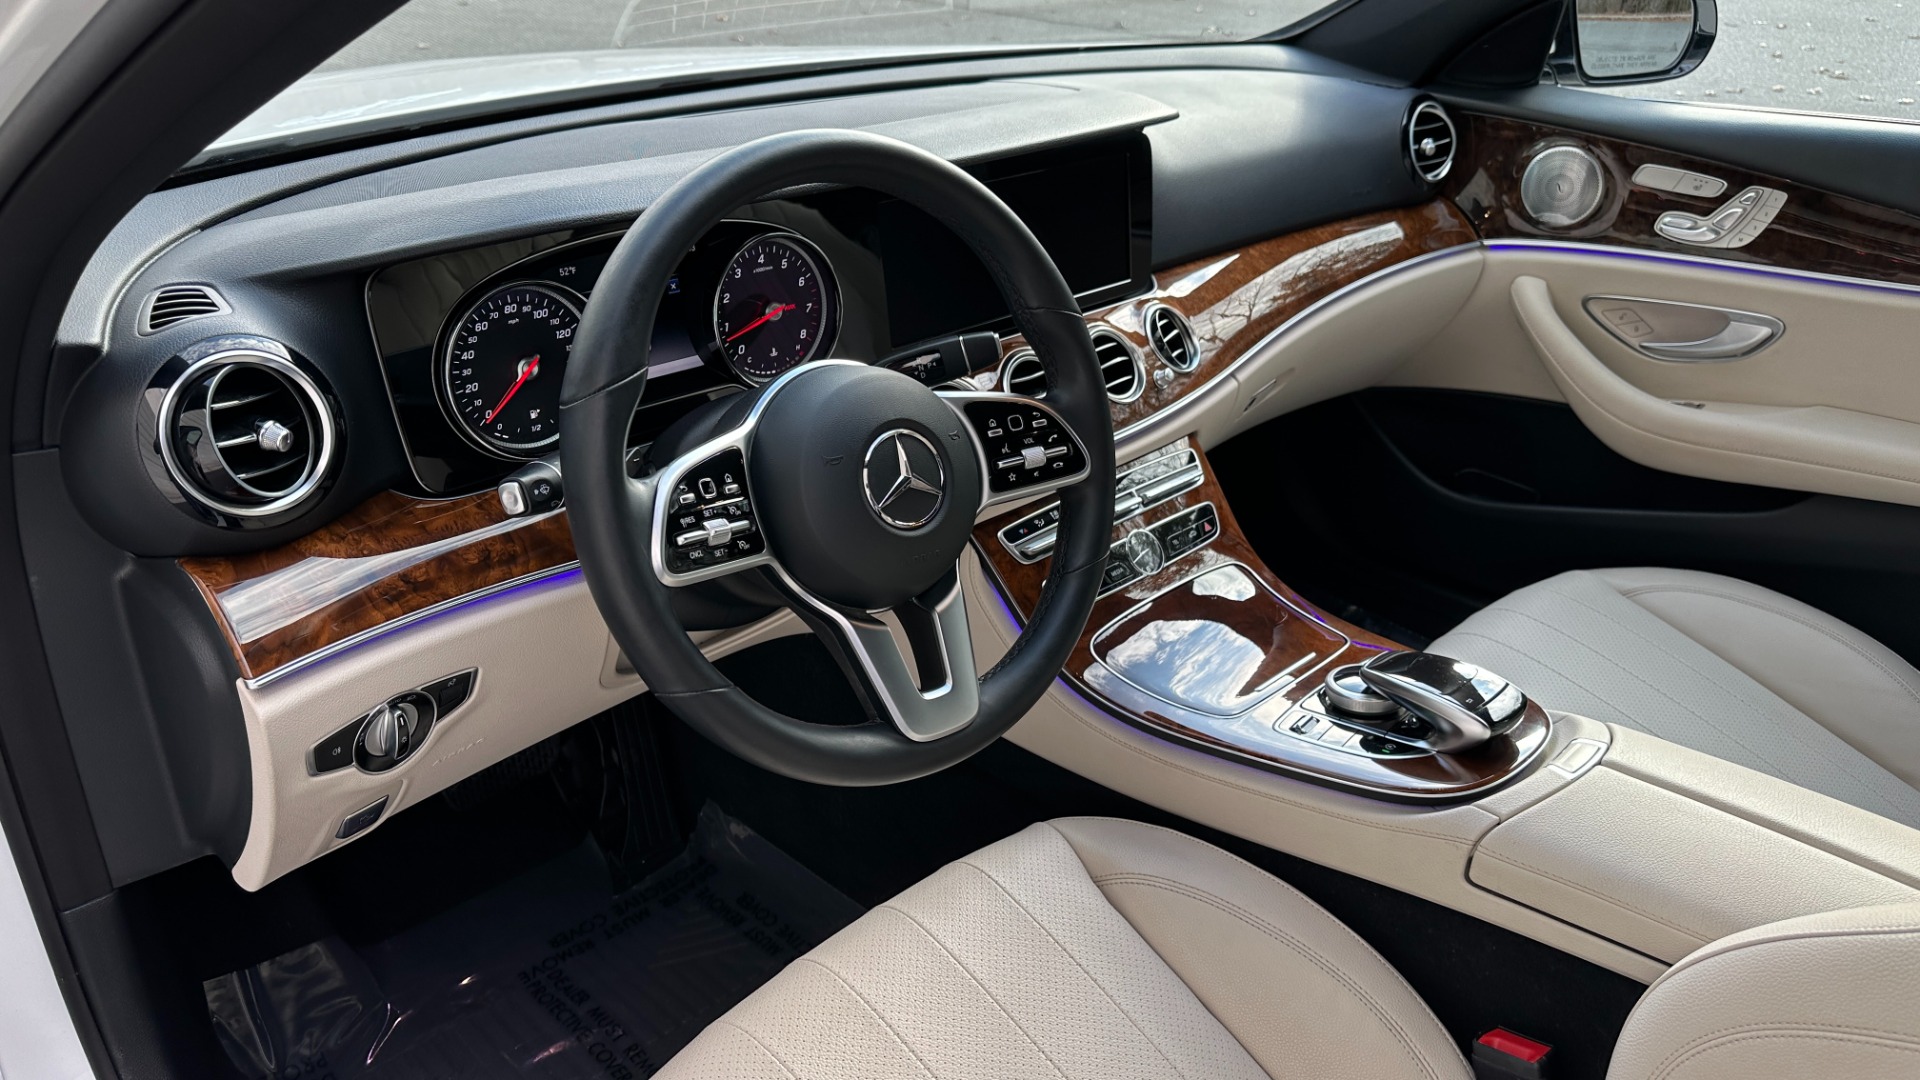 Used 2019 Mercedes-Benz E-Class E300 / PREMIUM PACKAGE / BLIND SPOT / BURMESTER SOUND / HEATED STEERING for sale $41,495 at Formula Imports in Charlotte NC 28227 10